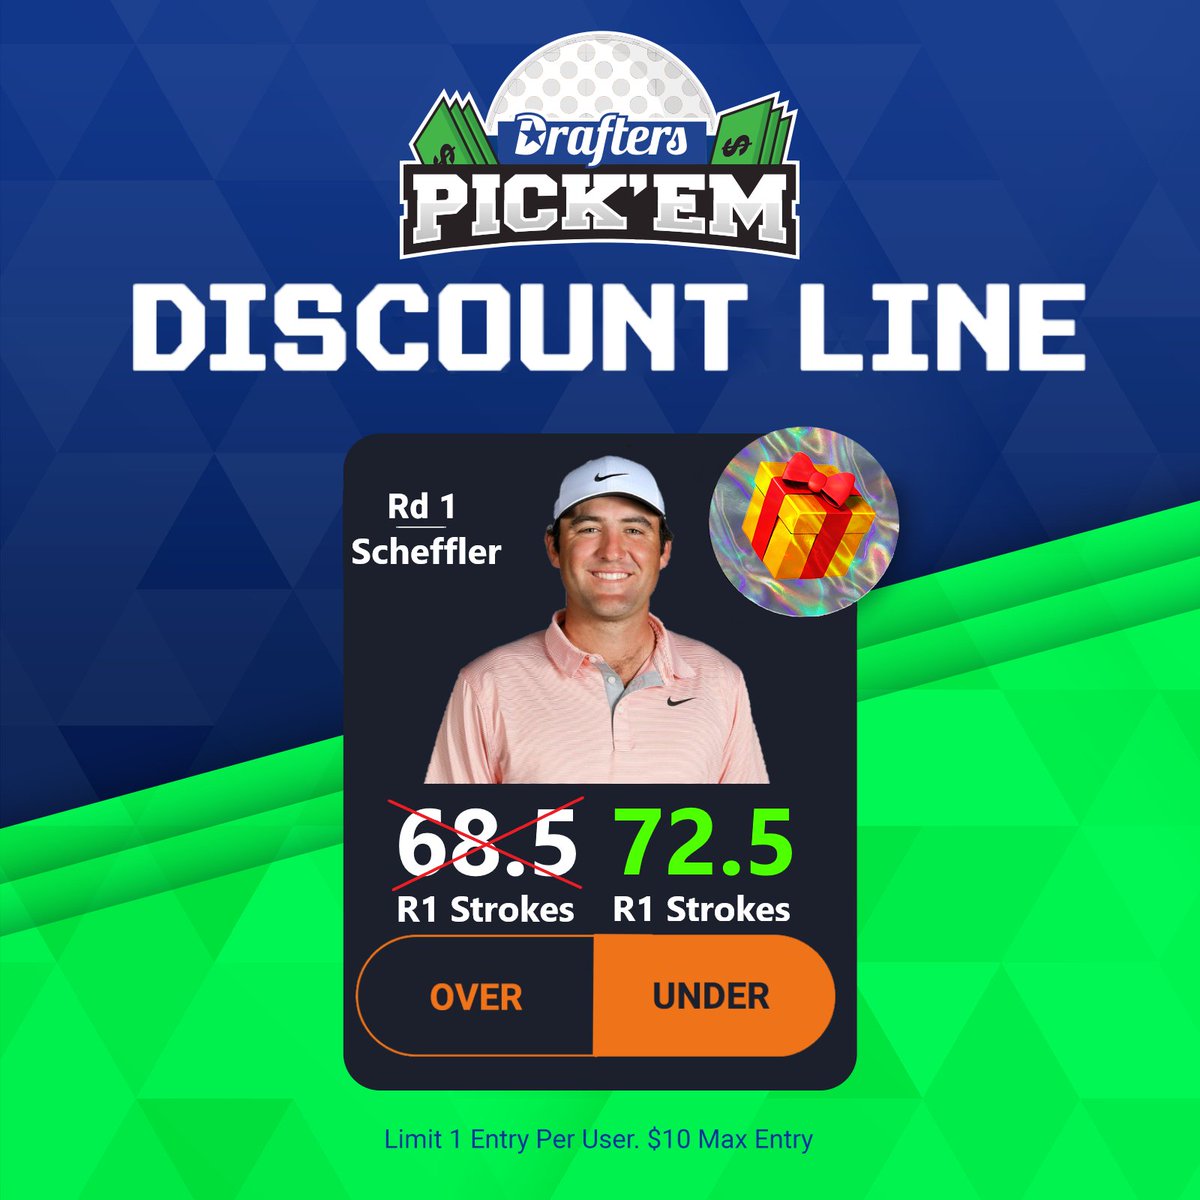 It's Major Championship Week On The PGA TOUR⛳️ Scottie Scheffler Discount Line🎁 Round 1 Strokes 68.5 ➡️ 72.5 !! Add This To Your Ticket And Win Up To 100x 💰